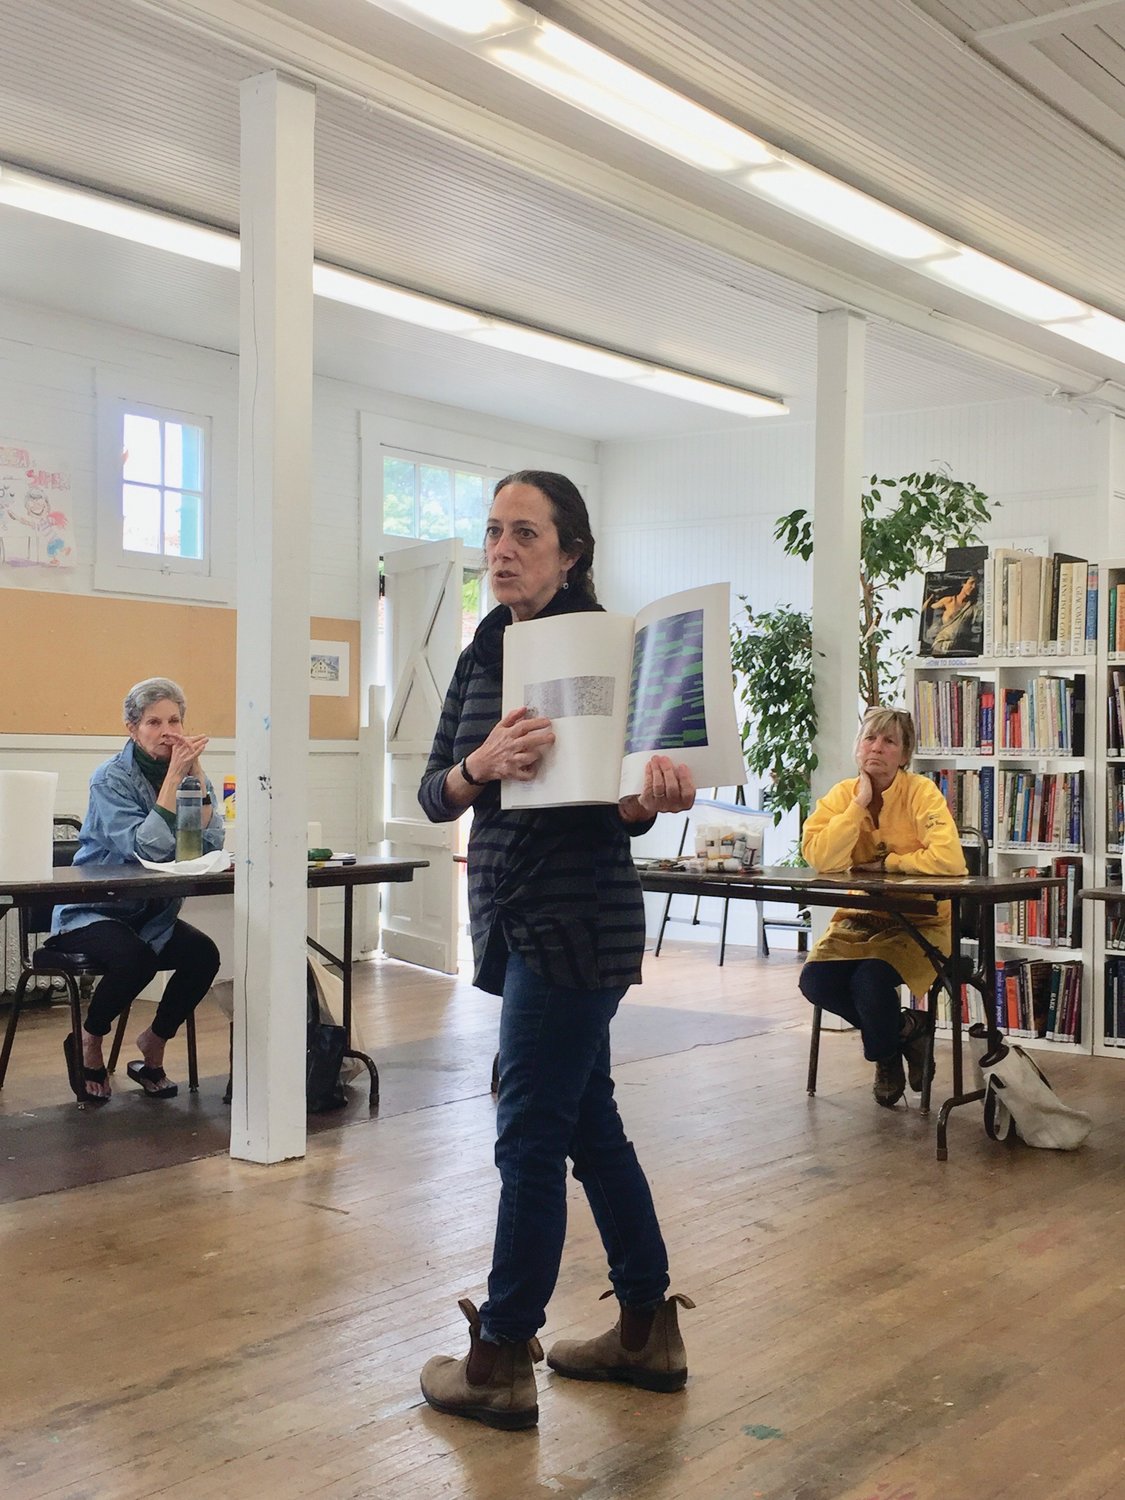 Meg Kaczyk, director of education for Northwind Art, teaches abstract painting at the Northwind Art School at Fort Worden Historical State Park’s Building 306.